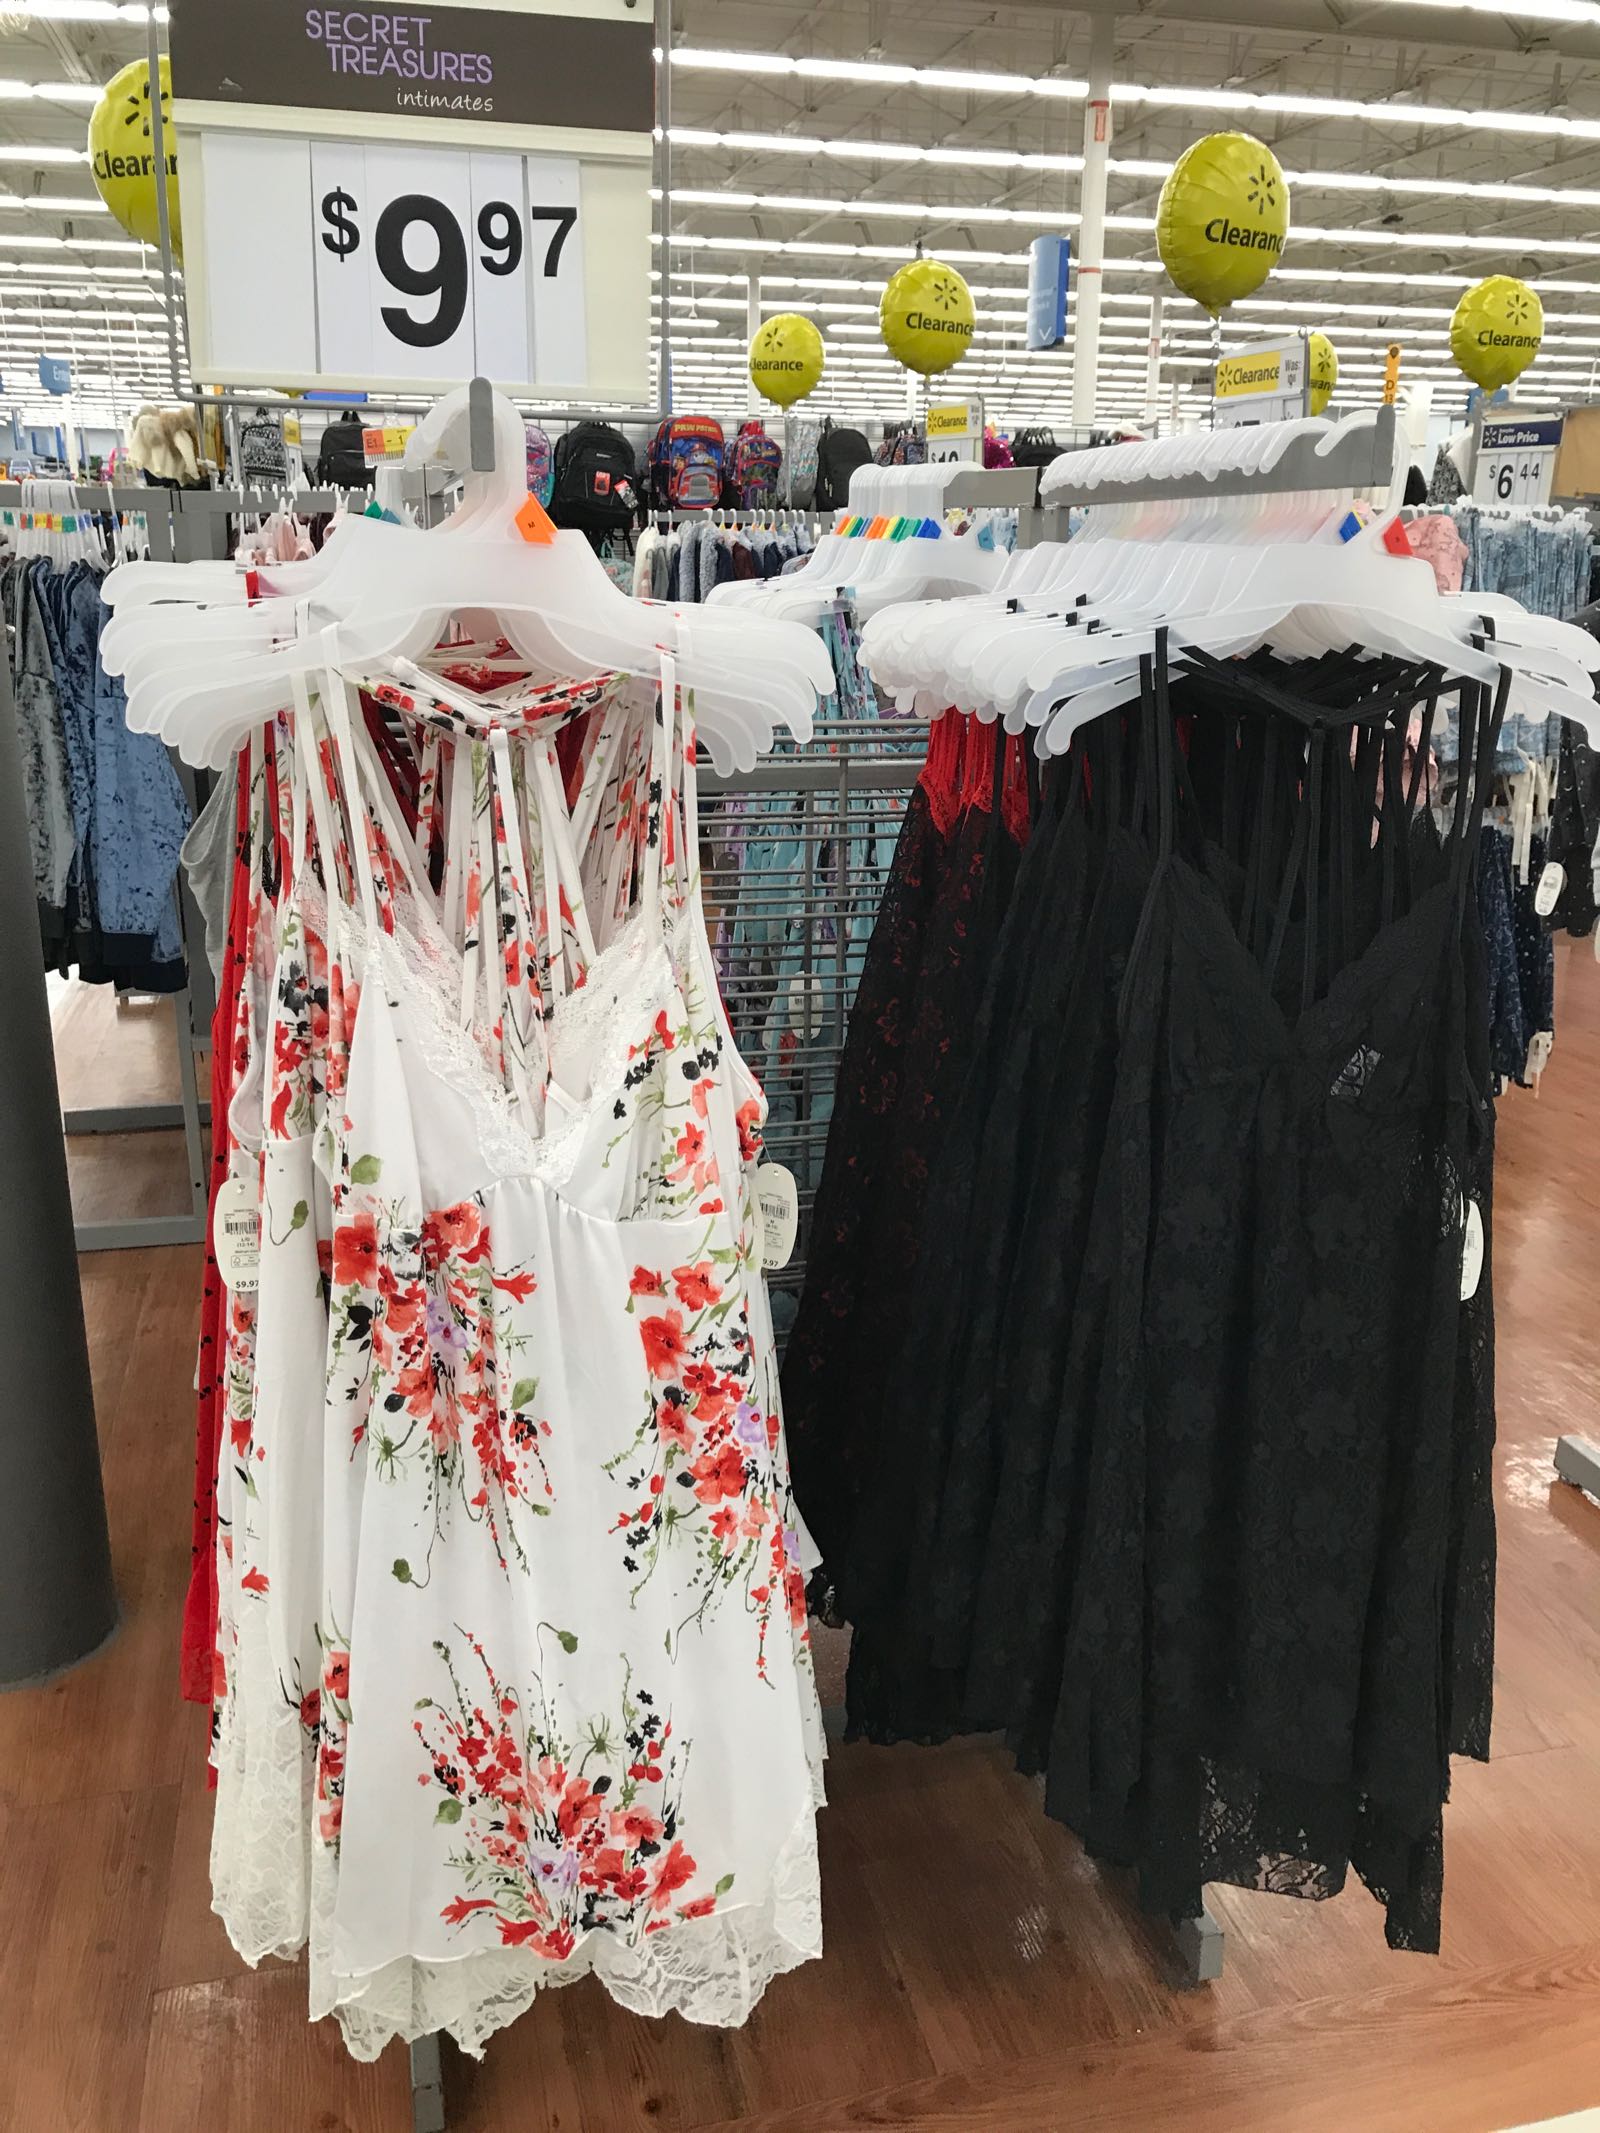 Cute slips for Valentine's Day at Walmart!!